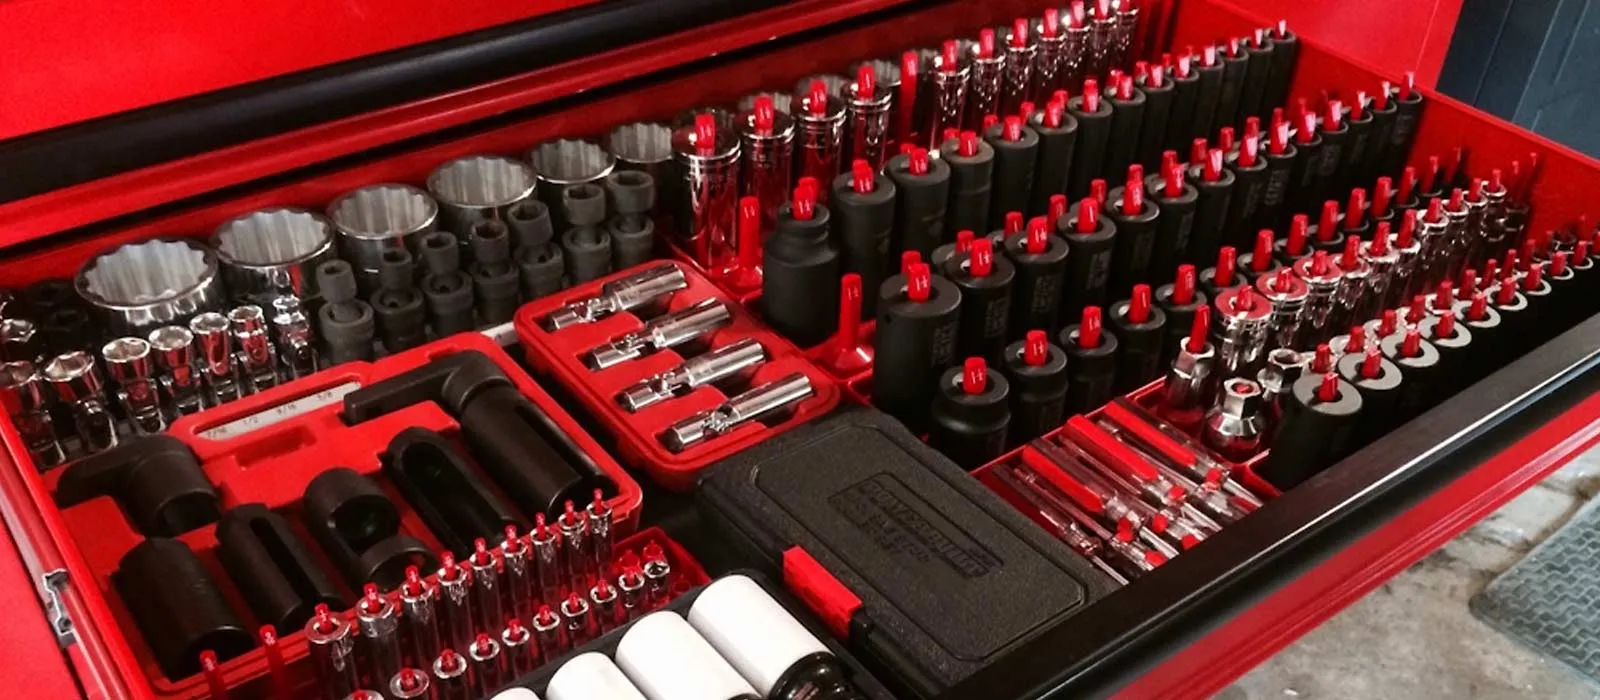 Snap-on tools for automotive technician tool list in a tool box